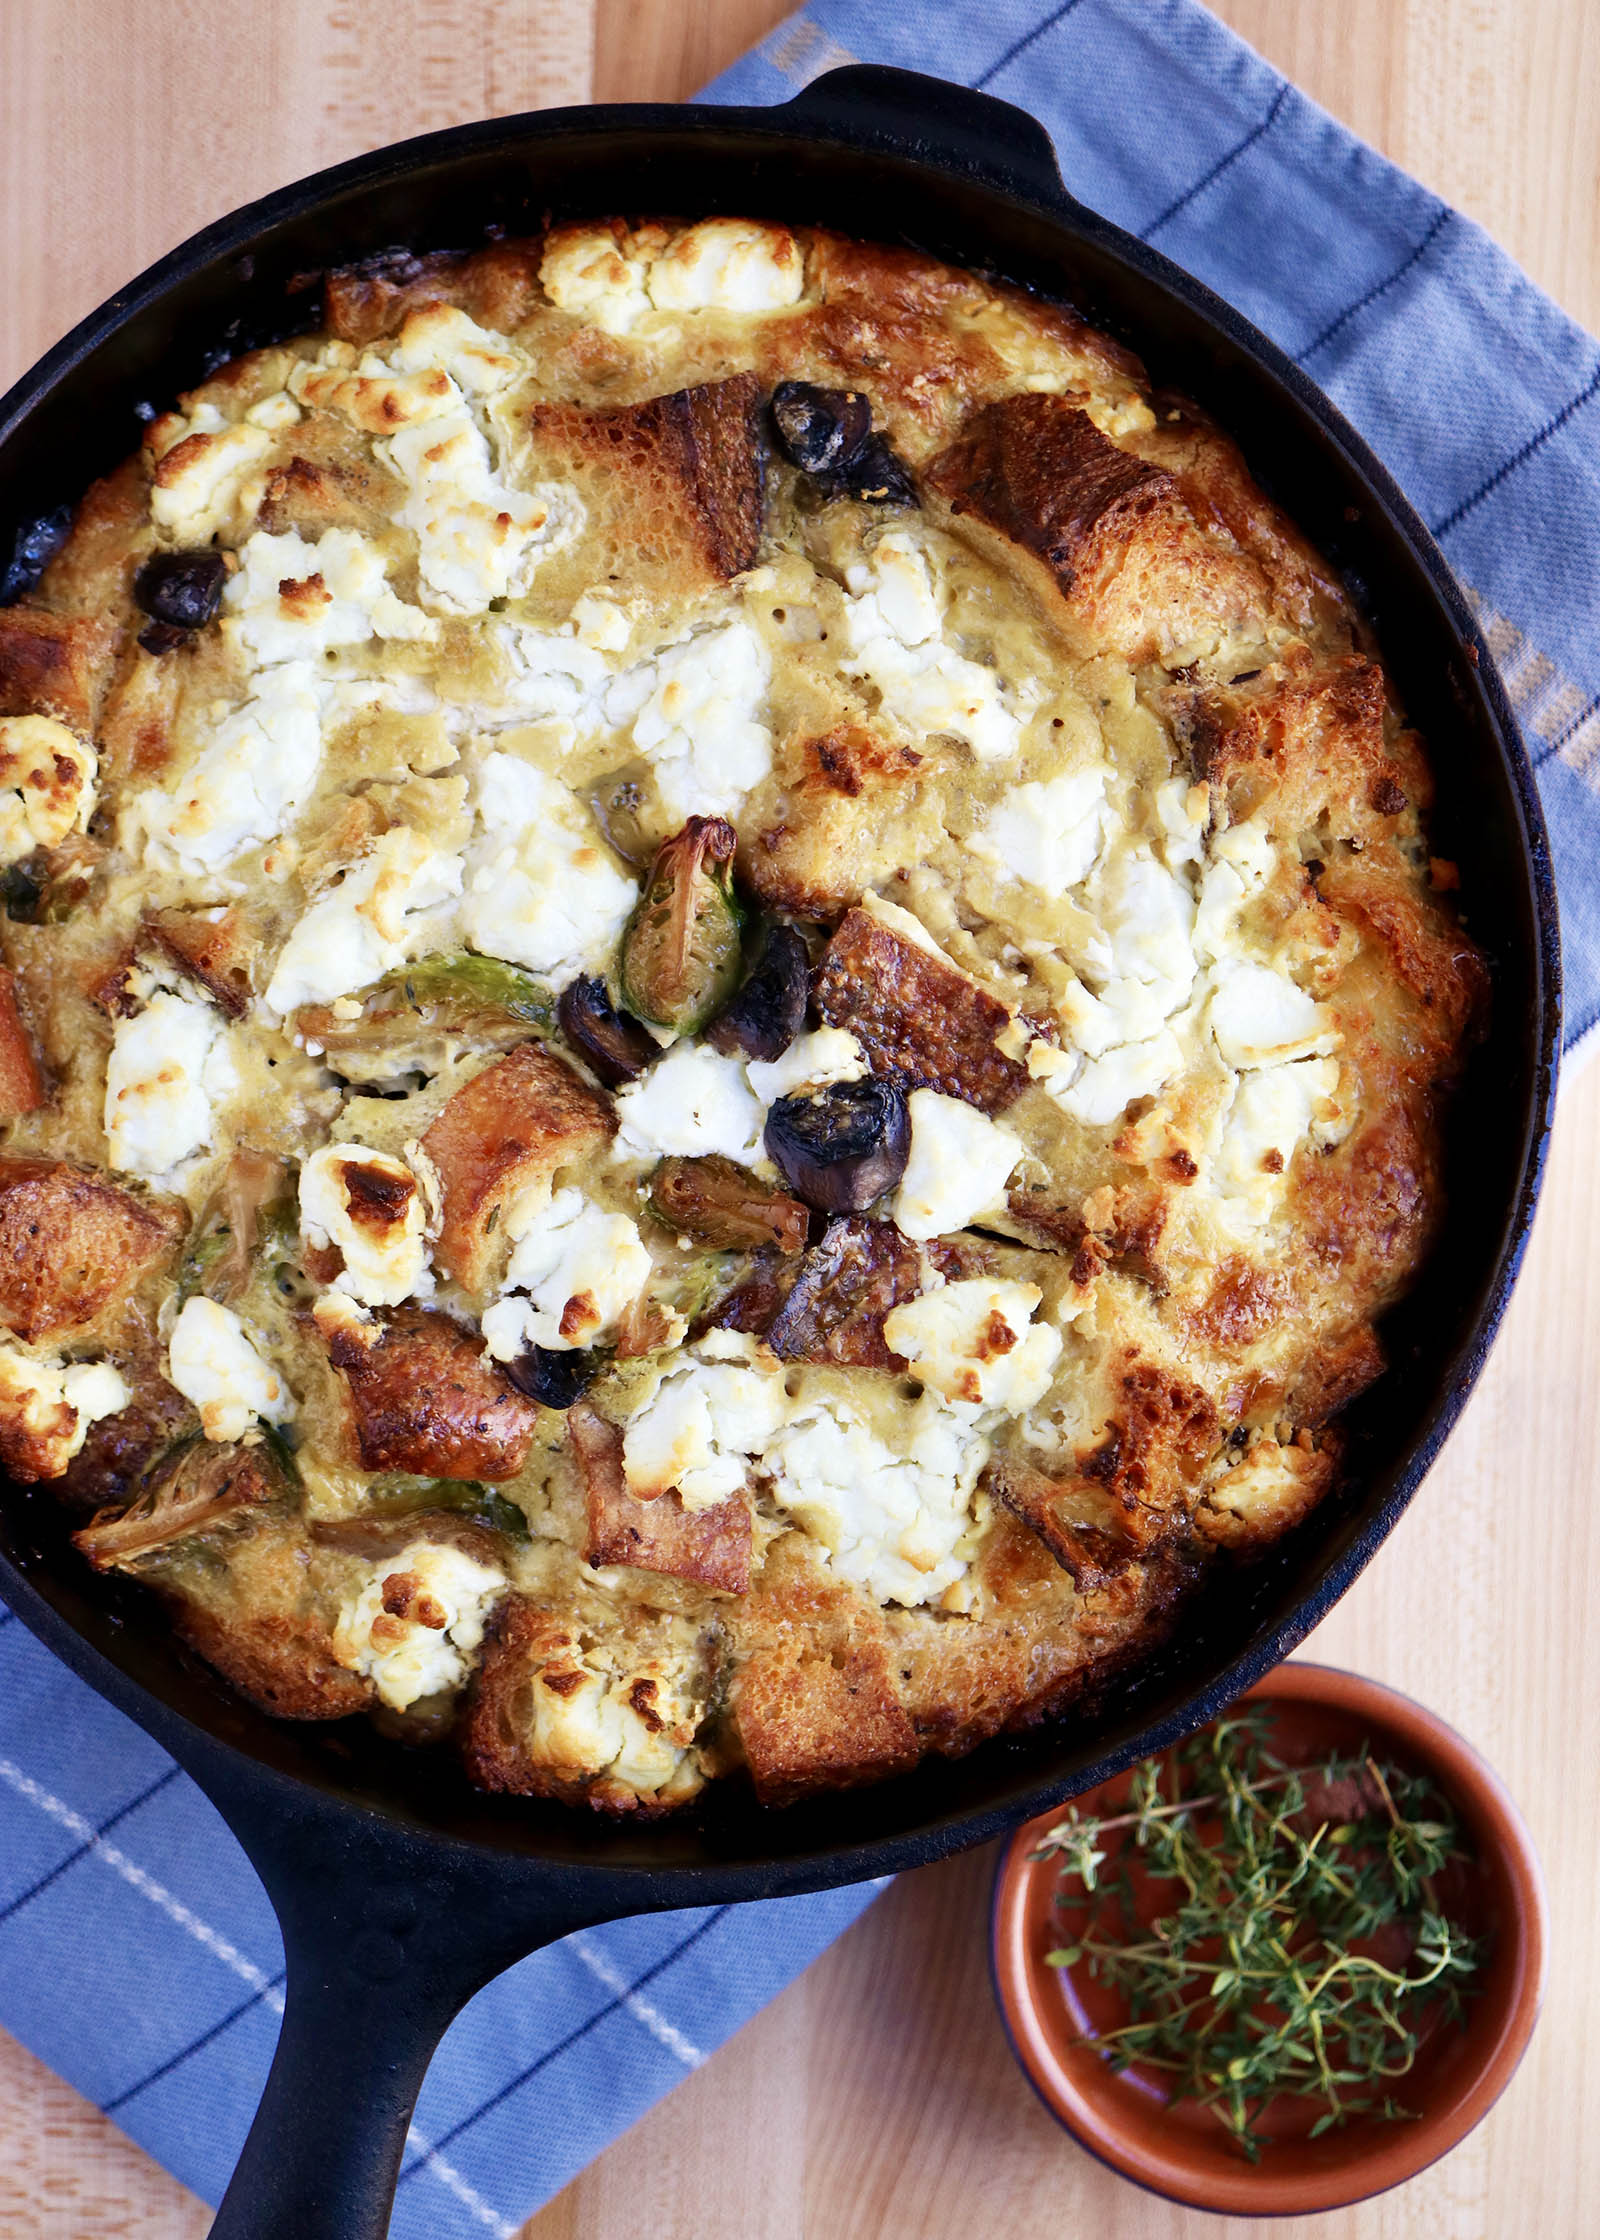 Breakfast Casserole with Brussels Sprouts, Mushrooms and Goat Cheese baked in a cast iron skillet with crispy edges and golden brown goat cheese.